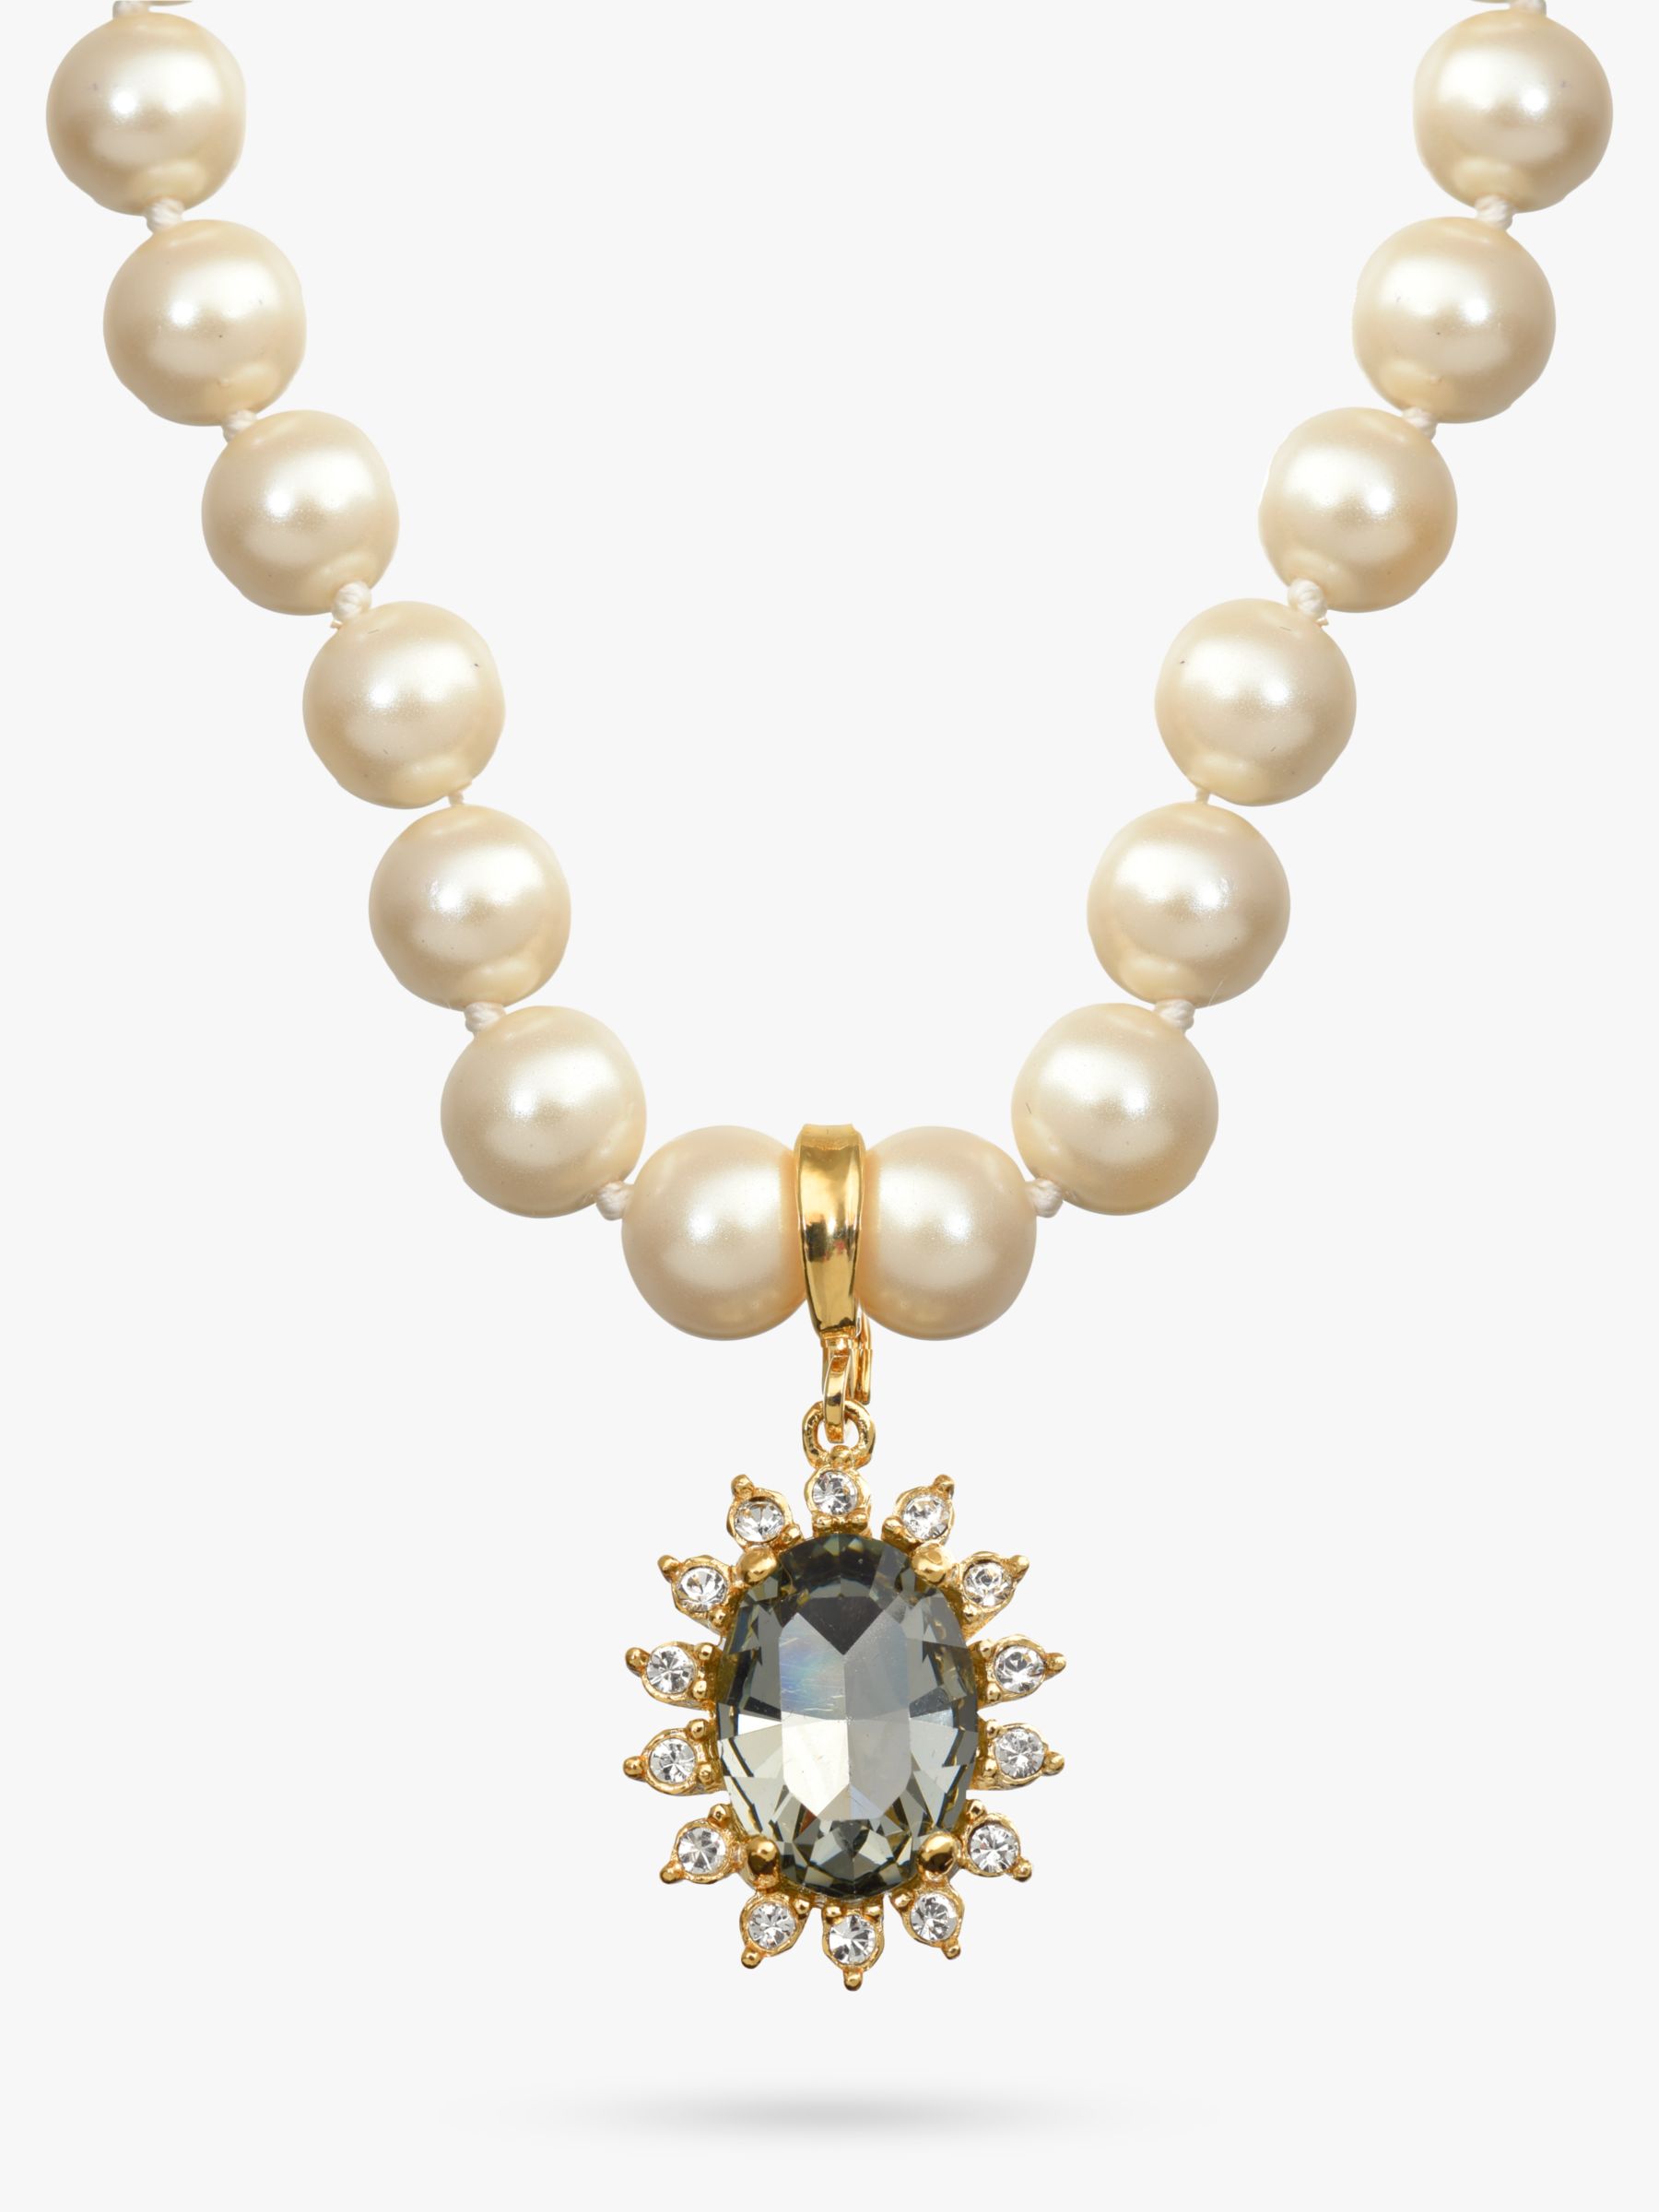 Buy Eclectica Vintage 22ct Gold Plated Faux Pearl and Swarovski Crystal Pendant Necklace, Dated Circa 1980s Online at johnlewis.com